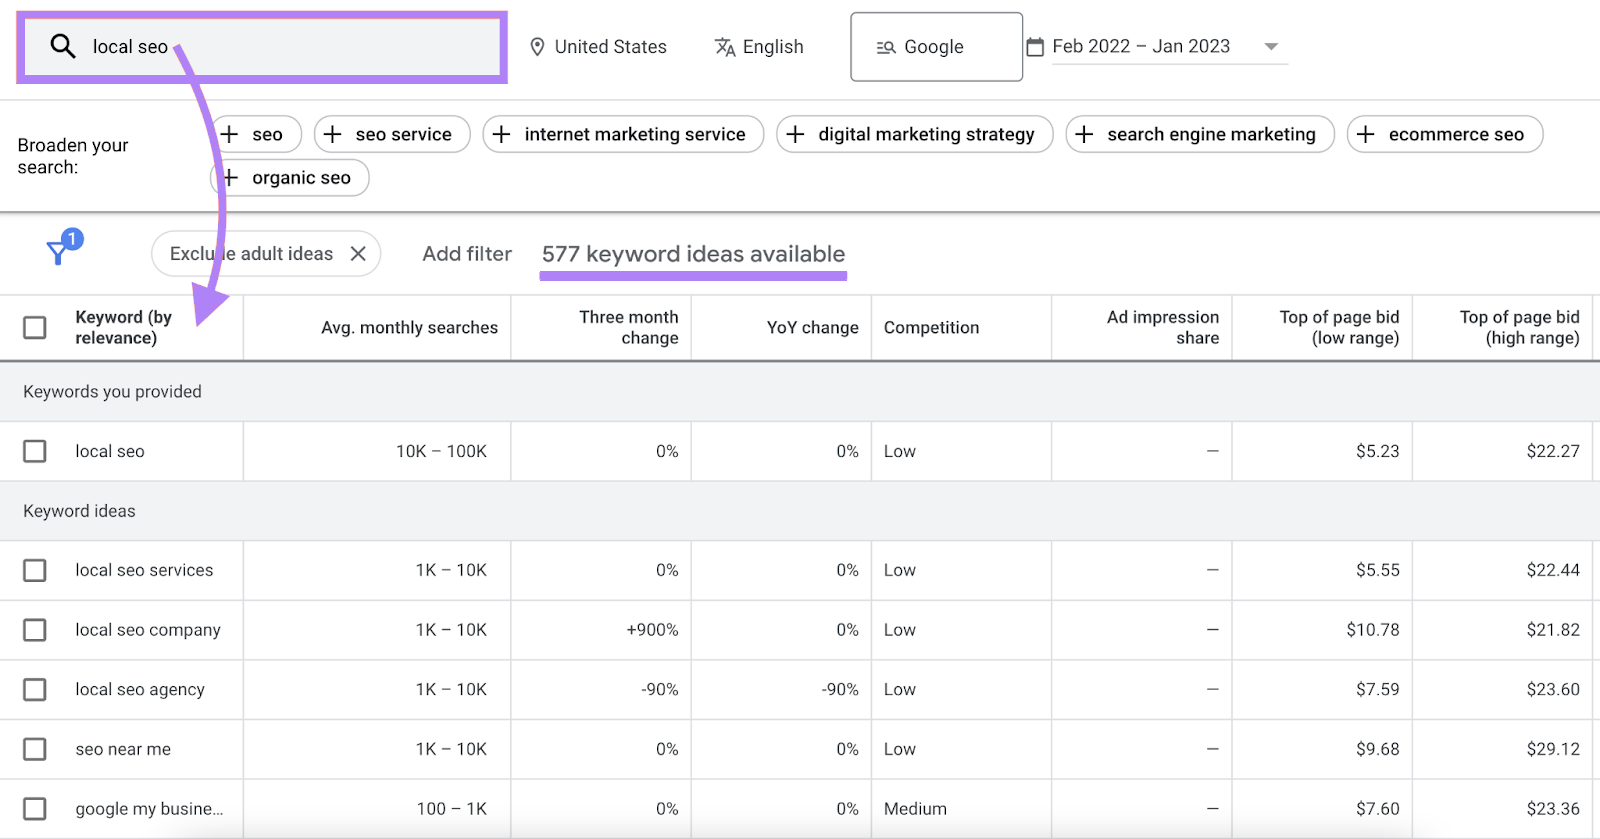 Google Keyword Planner results for "local seo"